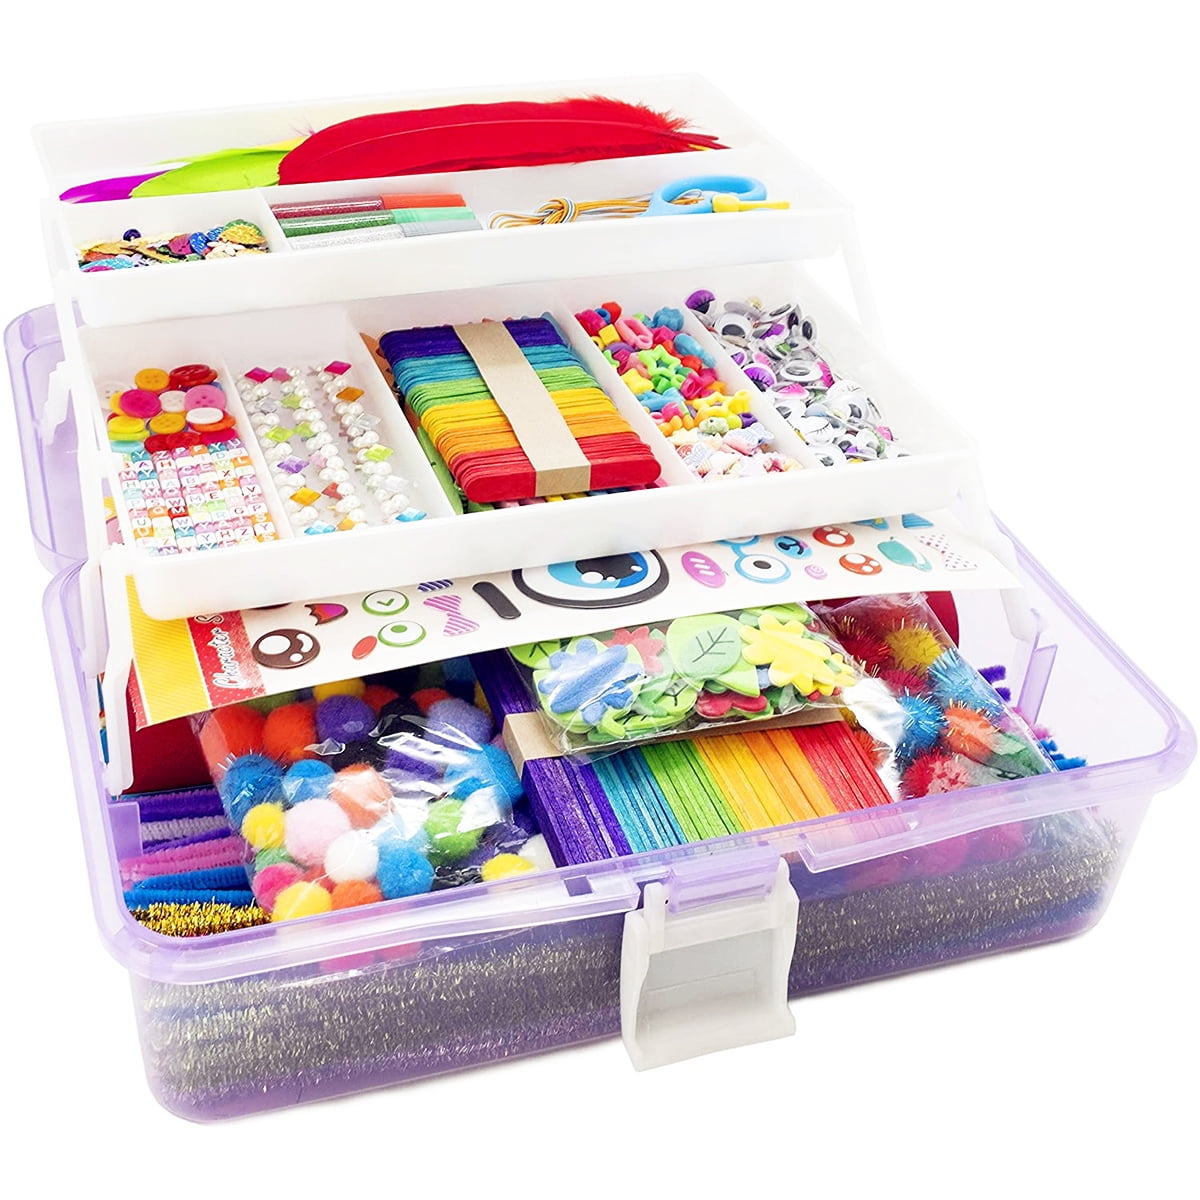 DANDELIONSKY 1000+ Pieces Giftable Craft Box for Kids DIY Craft